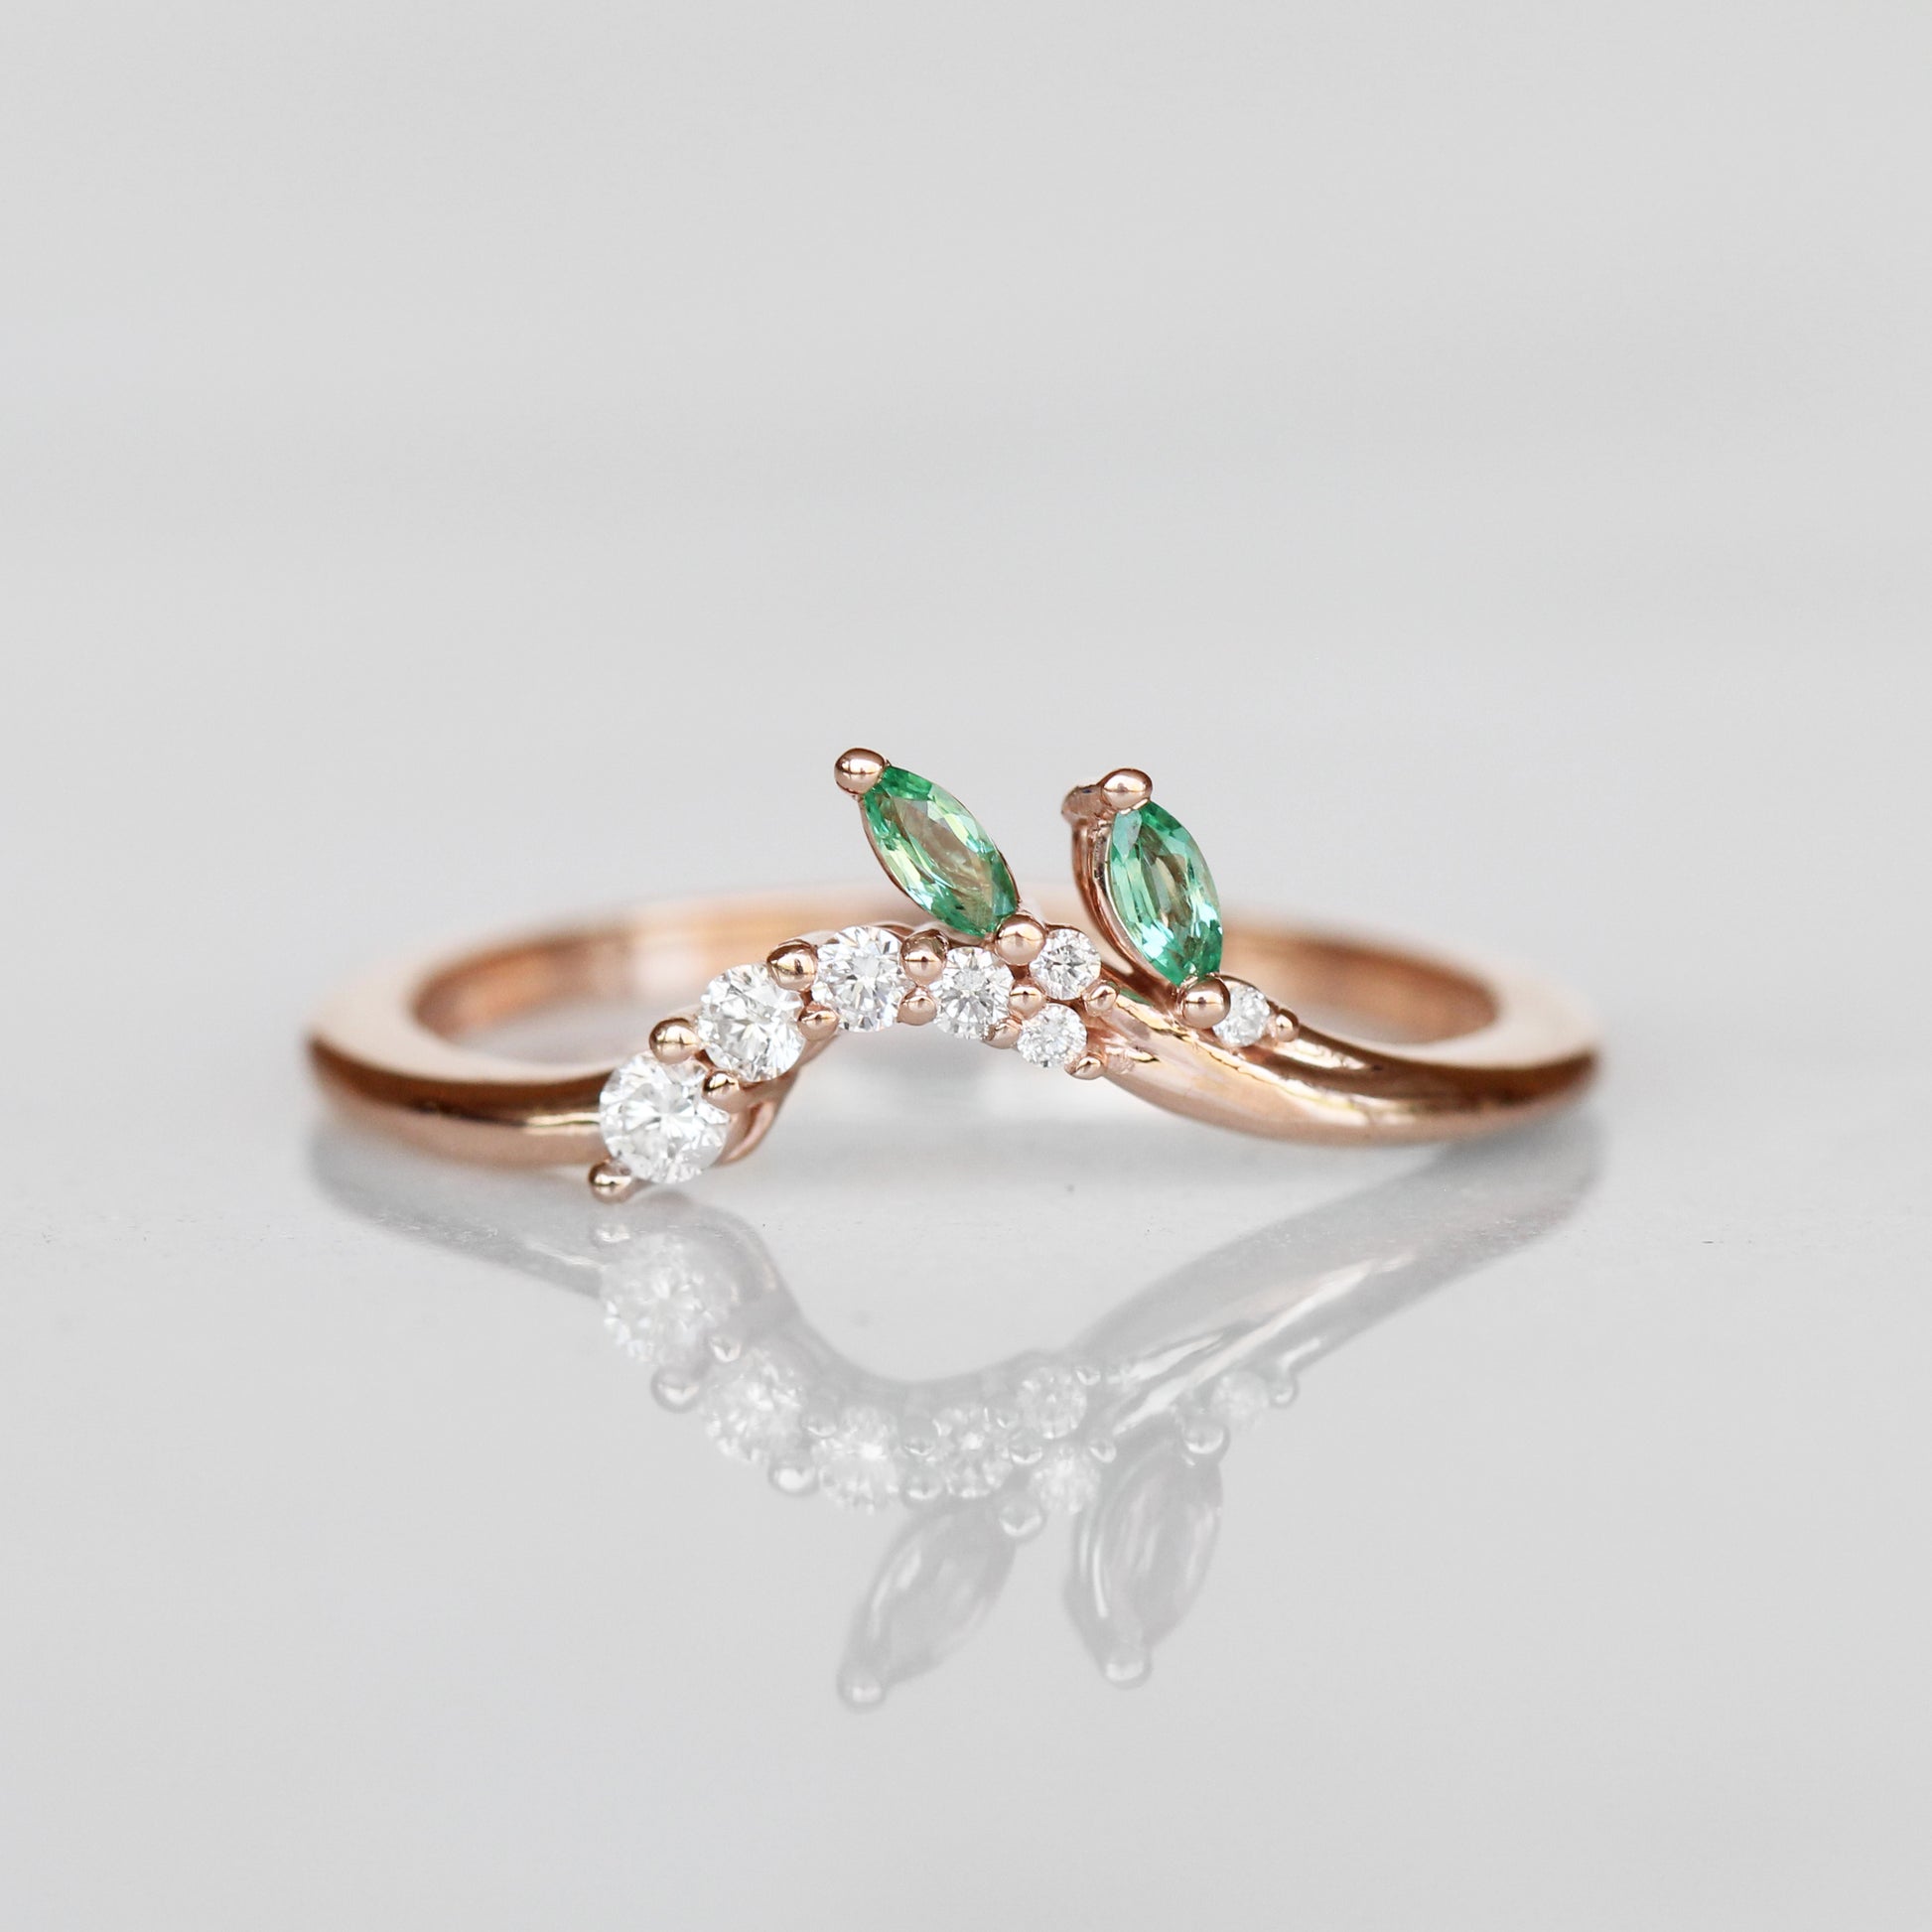 Clarissa - Floral contour wedding stacking diamond and emerald band - Midwinter Co. Alternative Bridal Rings and Modern Fine Jewelry